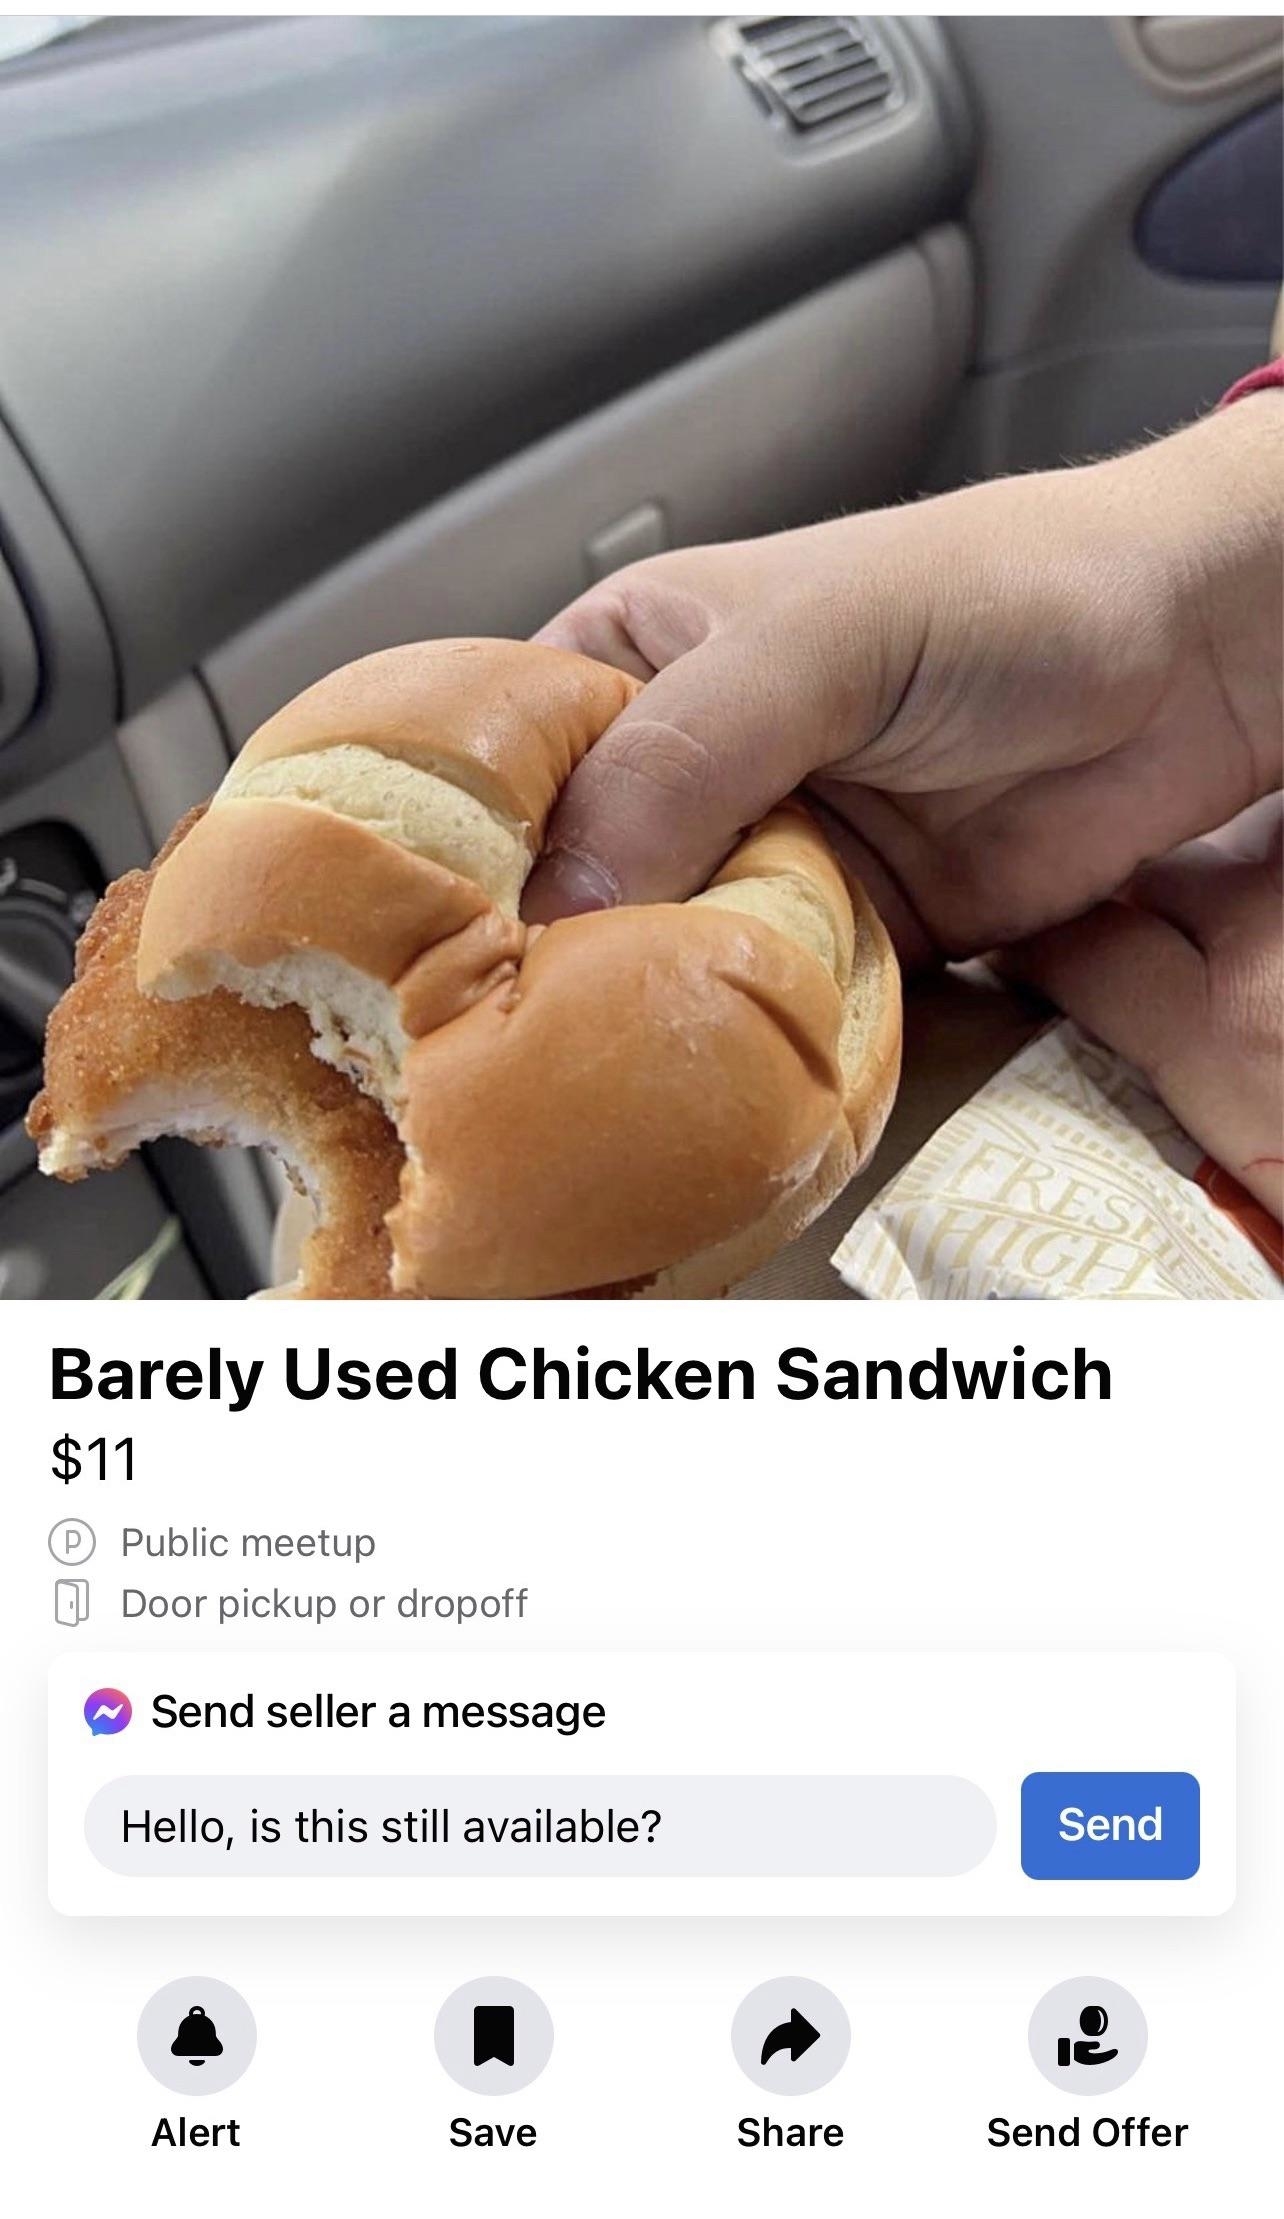 Hand holding a partially eaten sandwich, shown in a car, with a sales listing for &quot;Barely Used Chicken Sandwich&quot; at $11